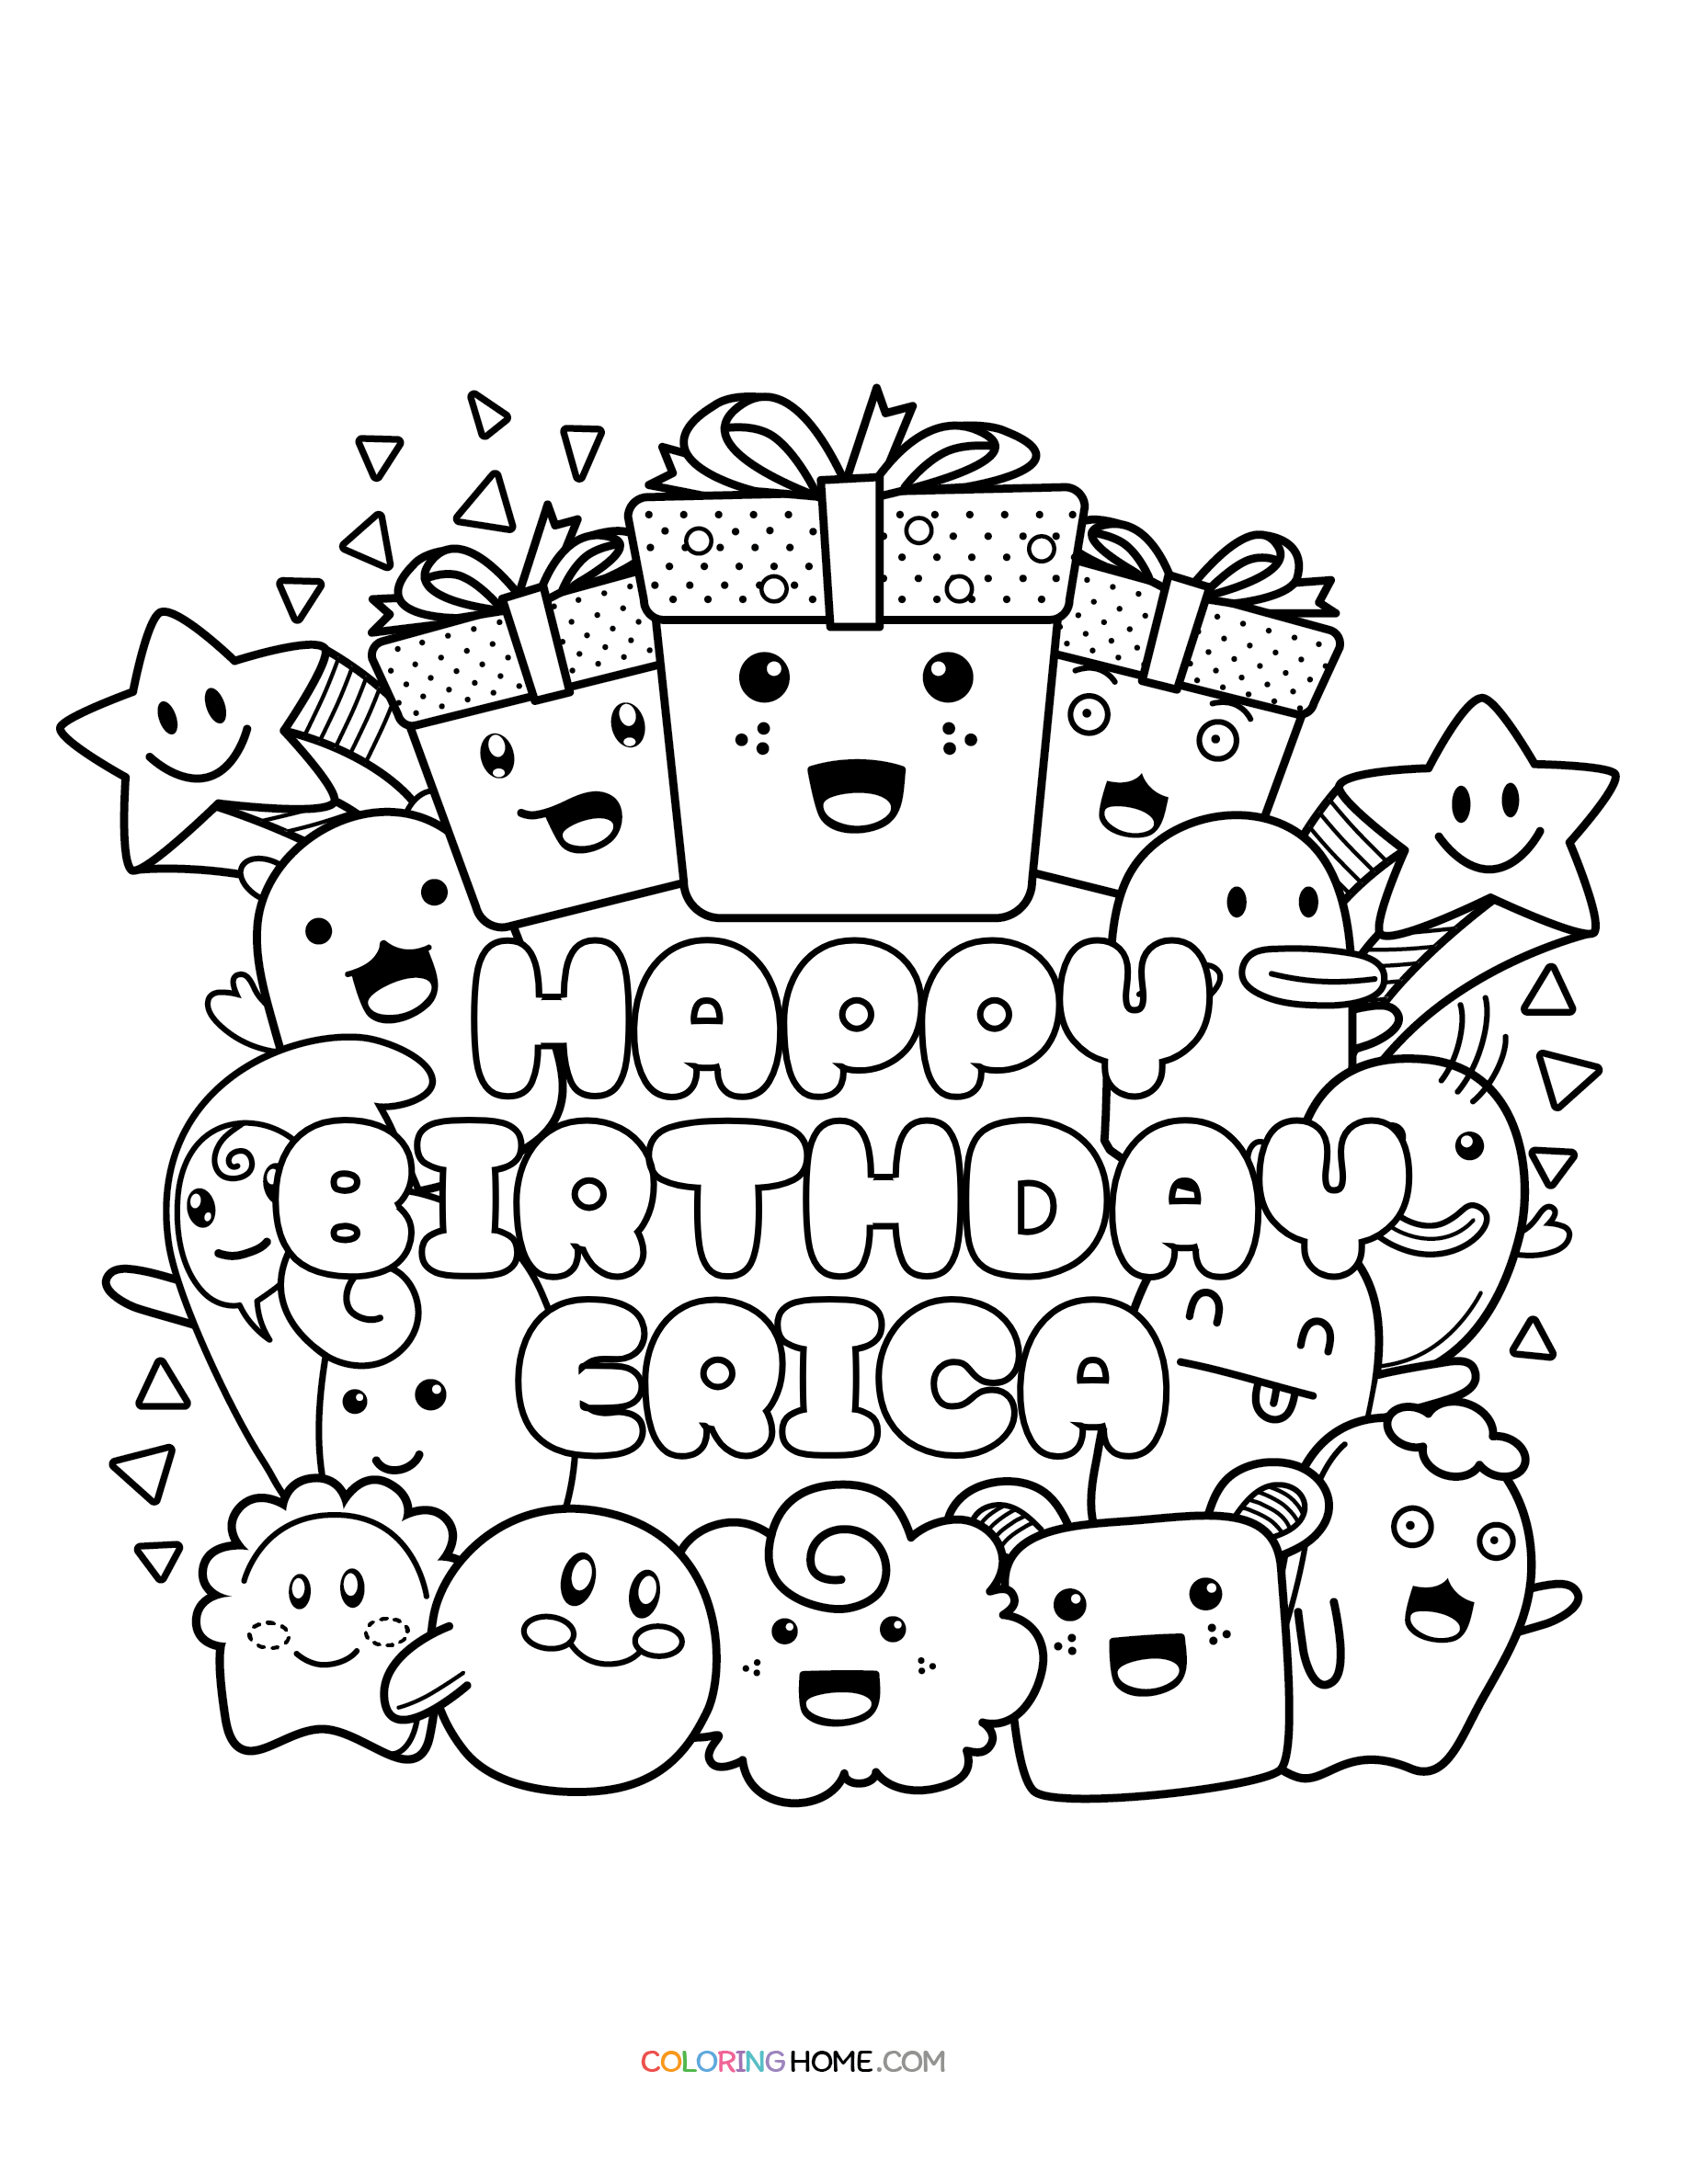 Happy Birthday Erica coloring page